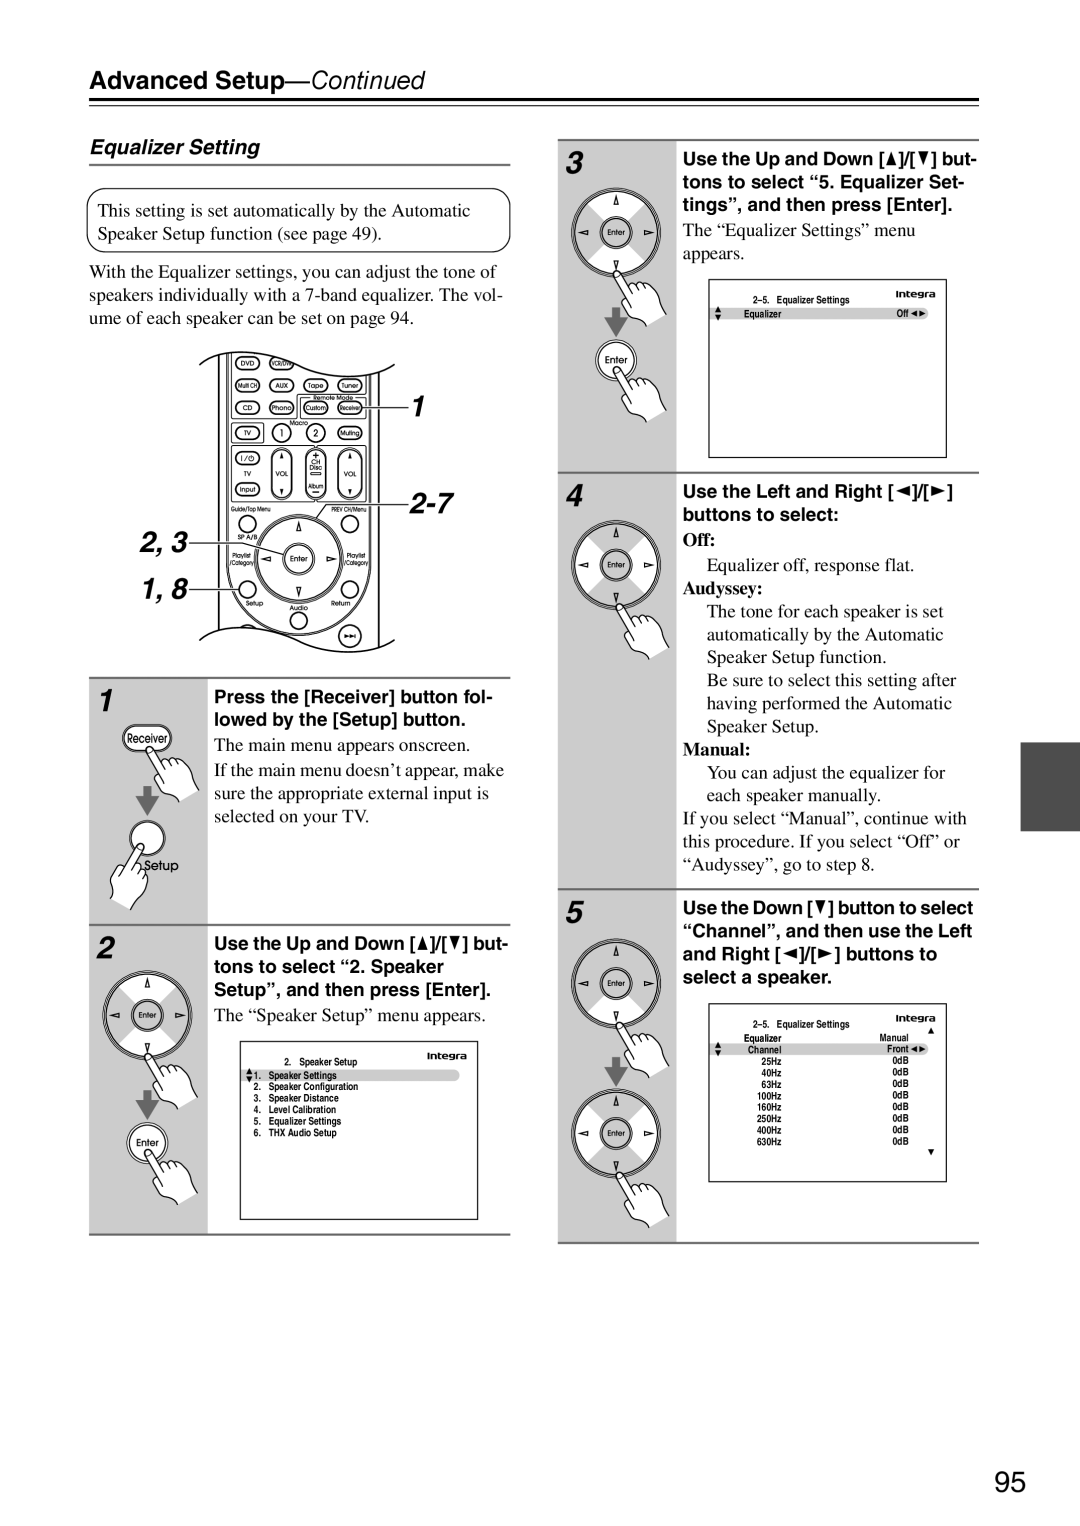 Onkyo DTR-7.9 instruction manual 1 2-7 4 2, Equalizer Setting, Audyssey, Manual, Advanced Setup—Continued 